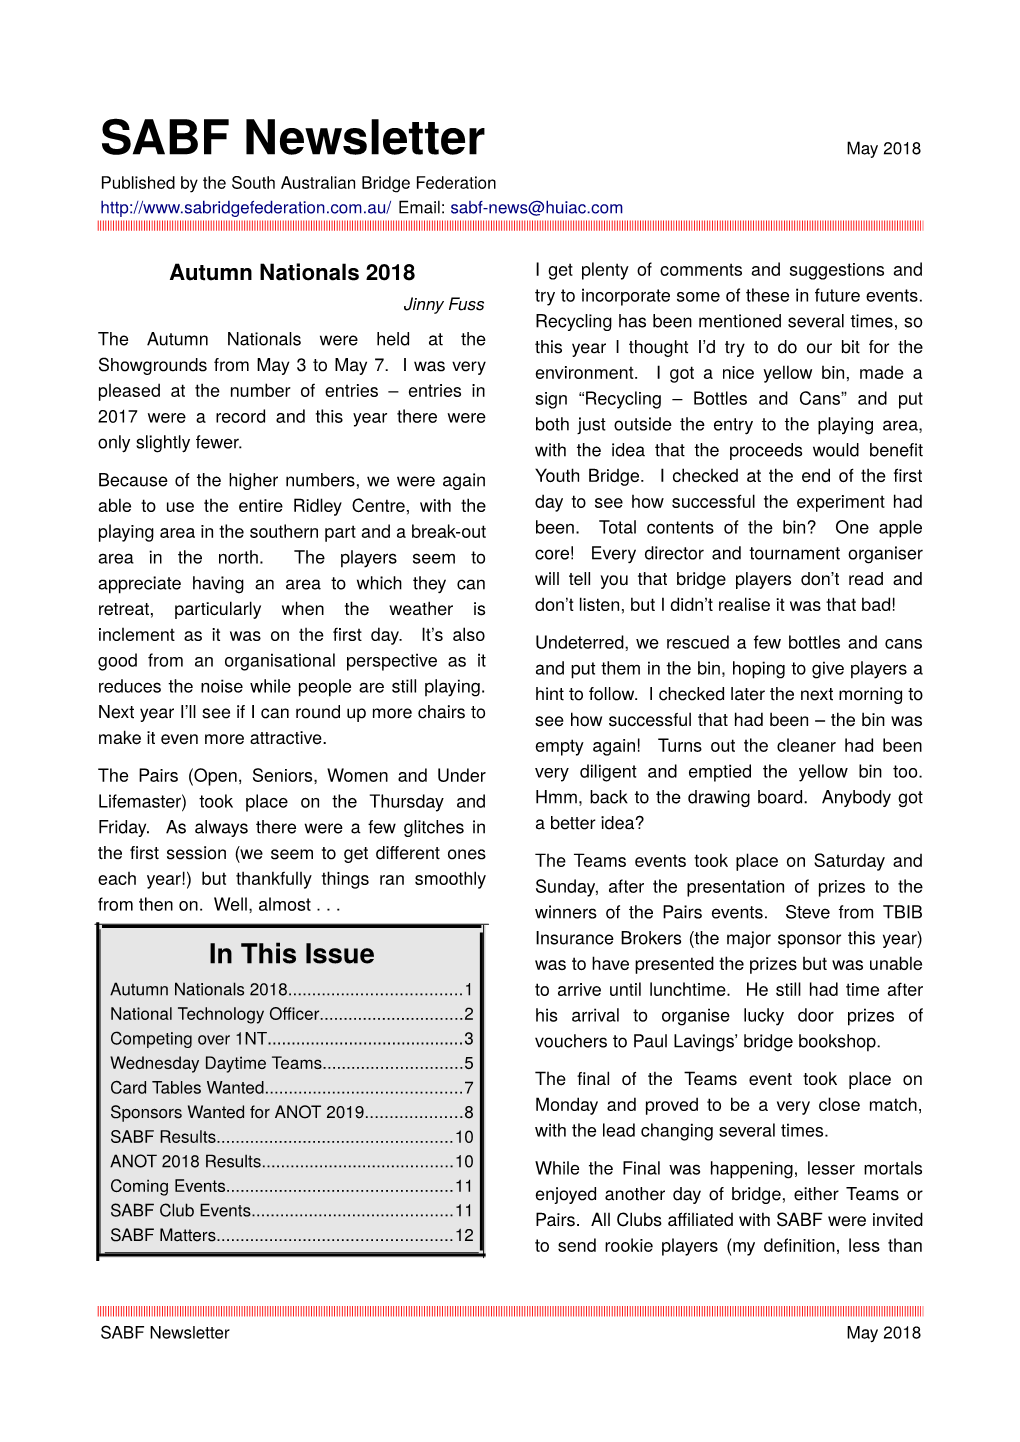 SABF Newsletter May 2018 Published by the South Australian Bridge Federation Email: Sabf-News@Huiac.Com